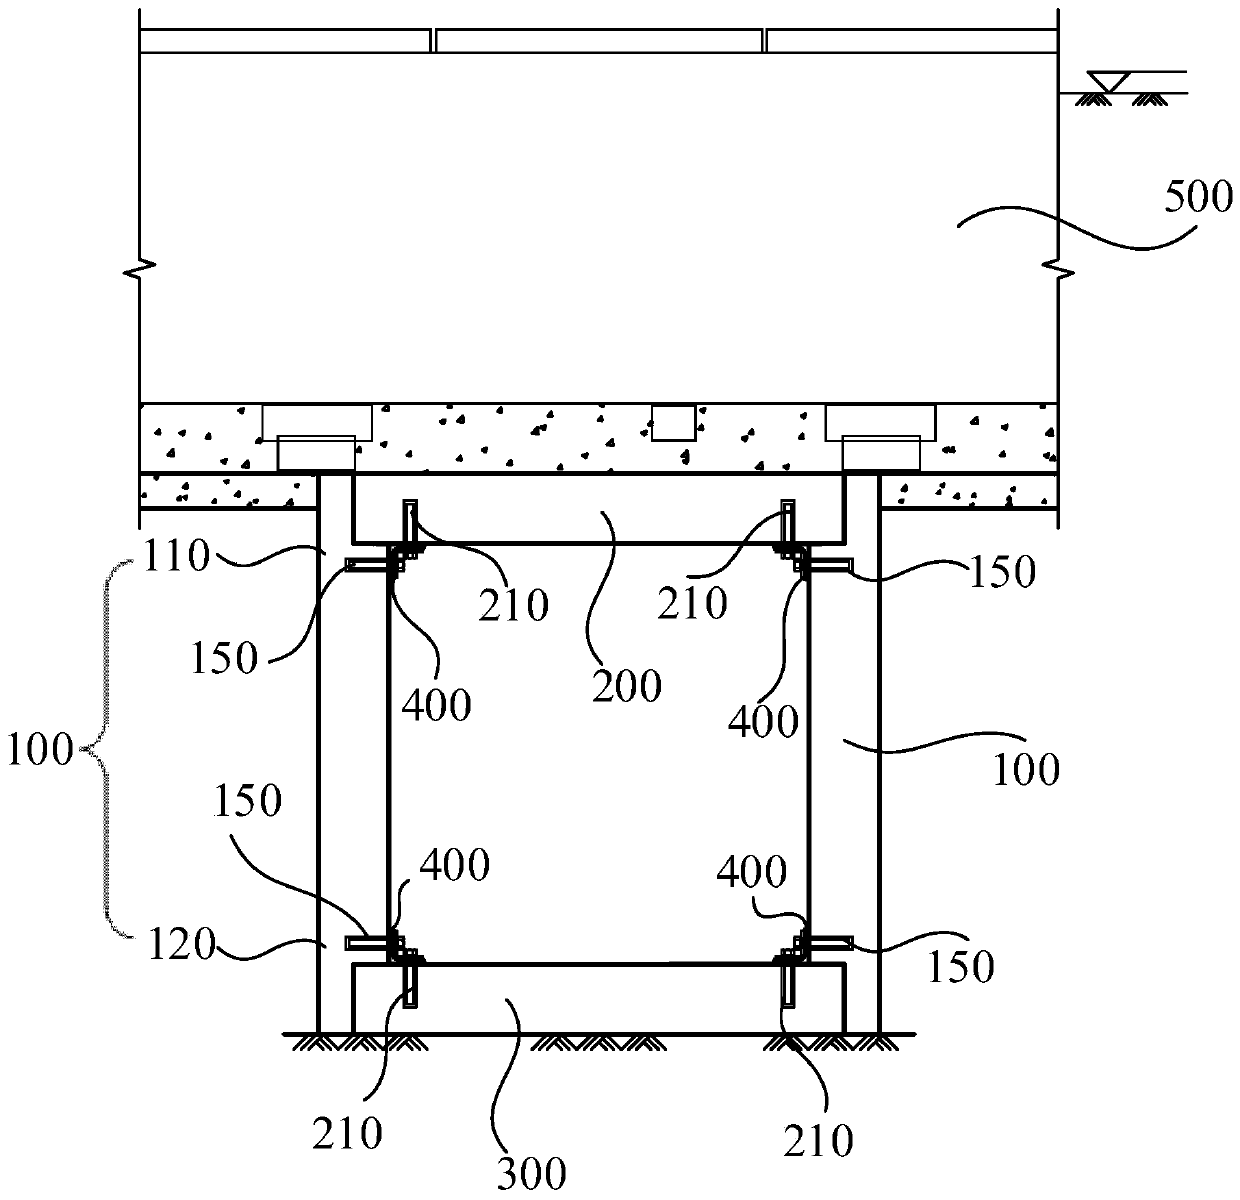 Fabricated cable trench and construction method